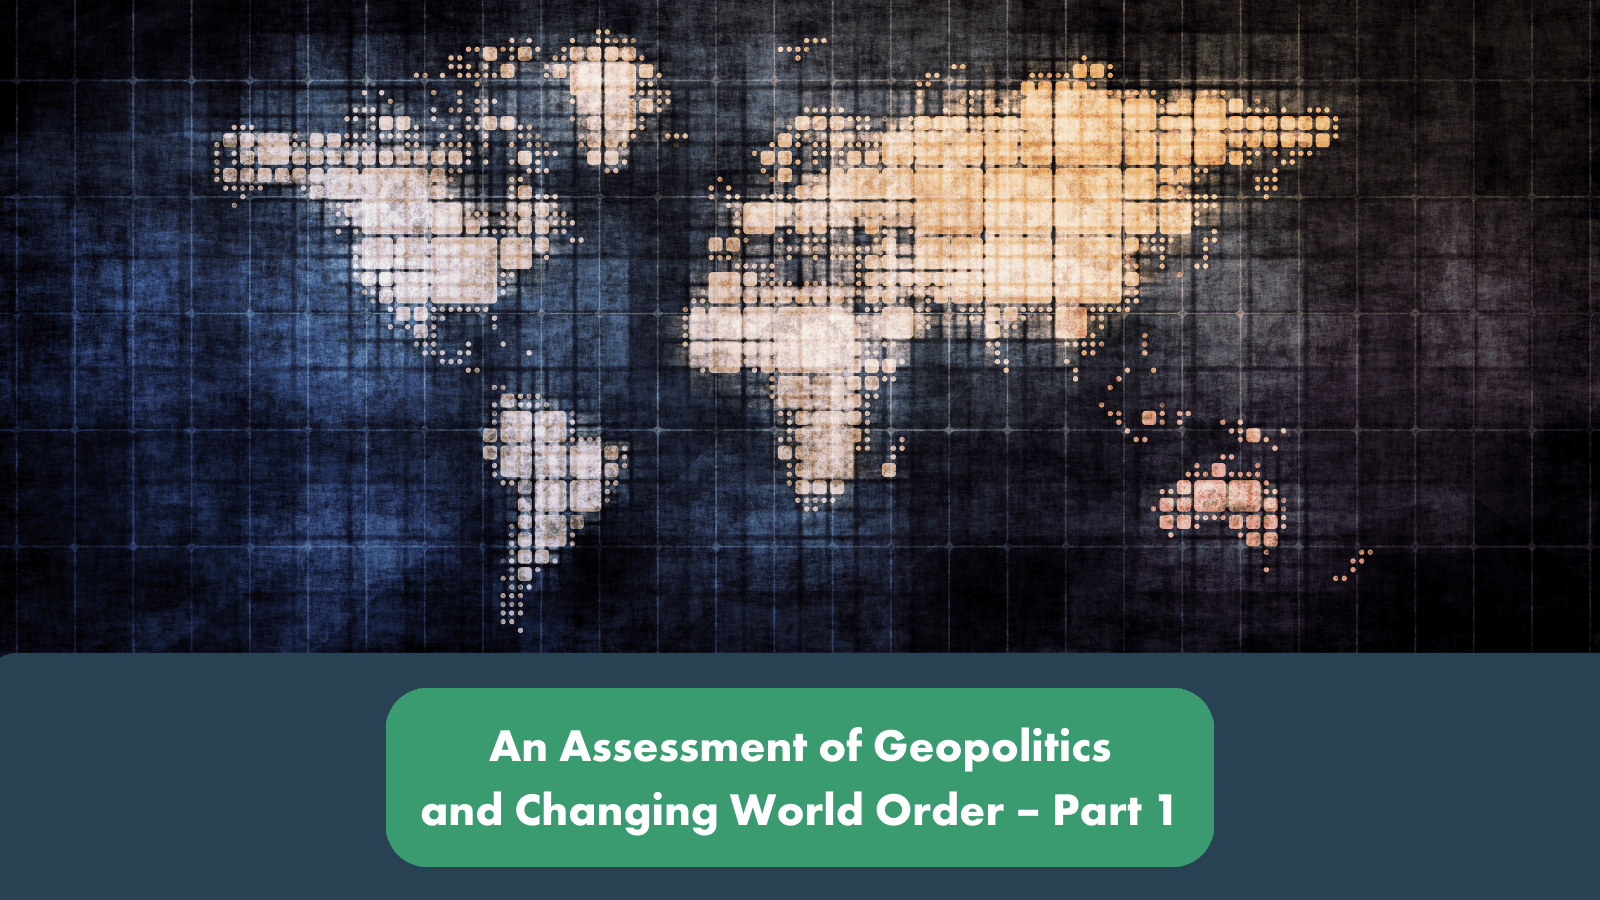 An Assessment of Geopolitics and Changing World Order – Part 1